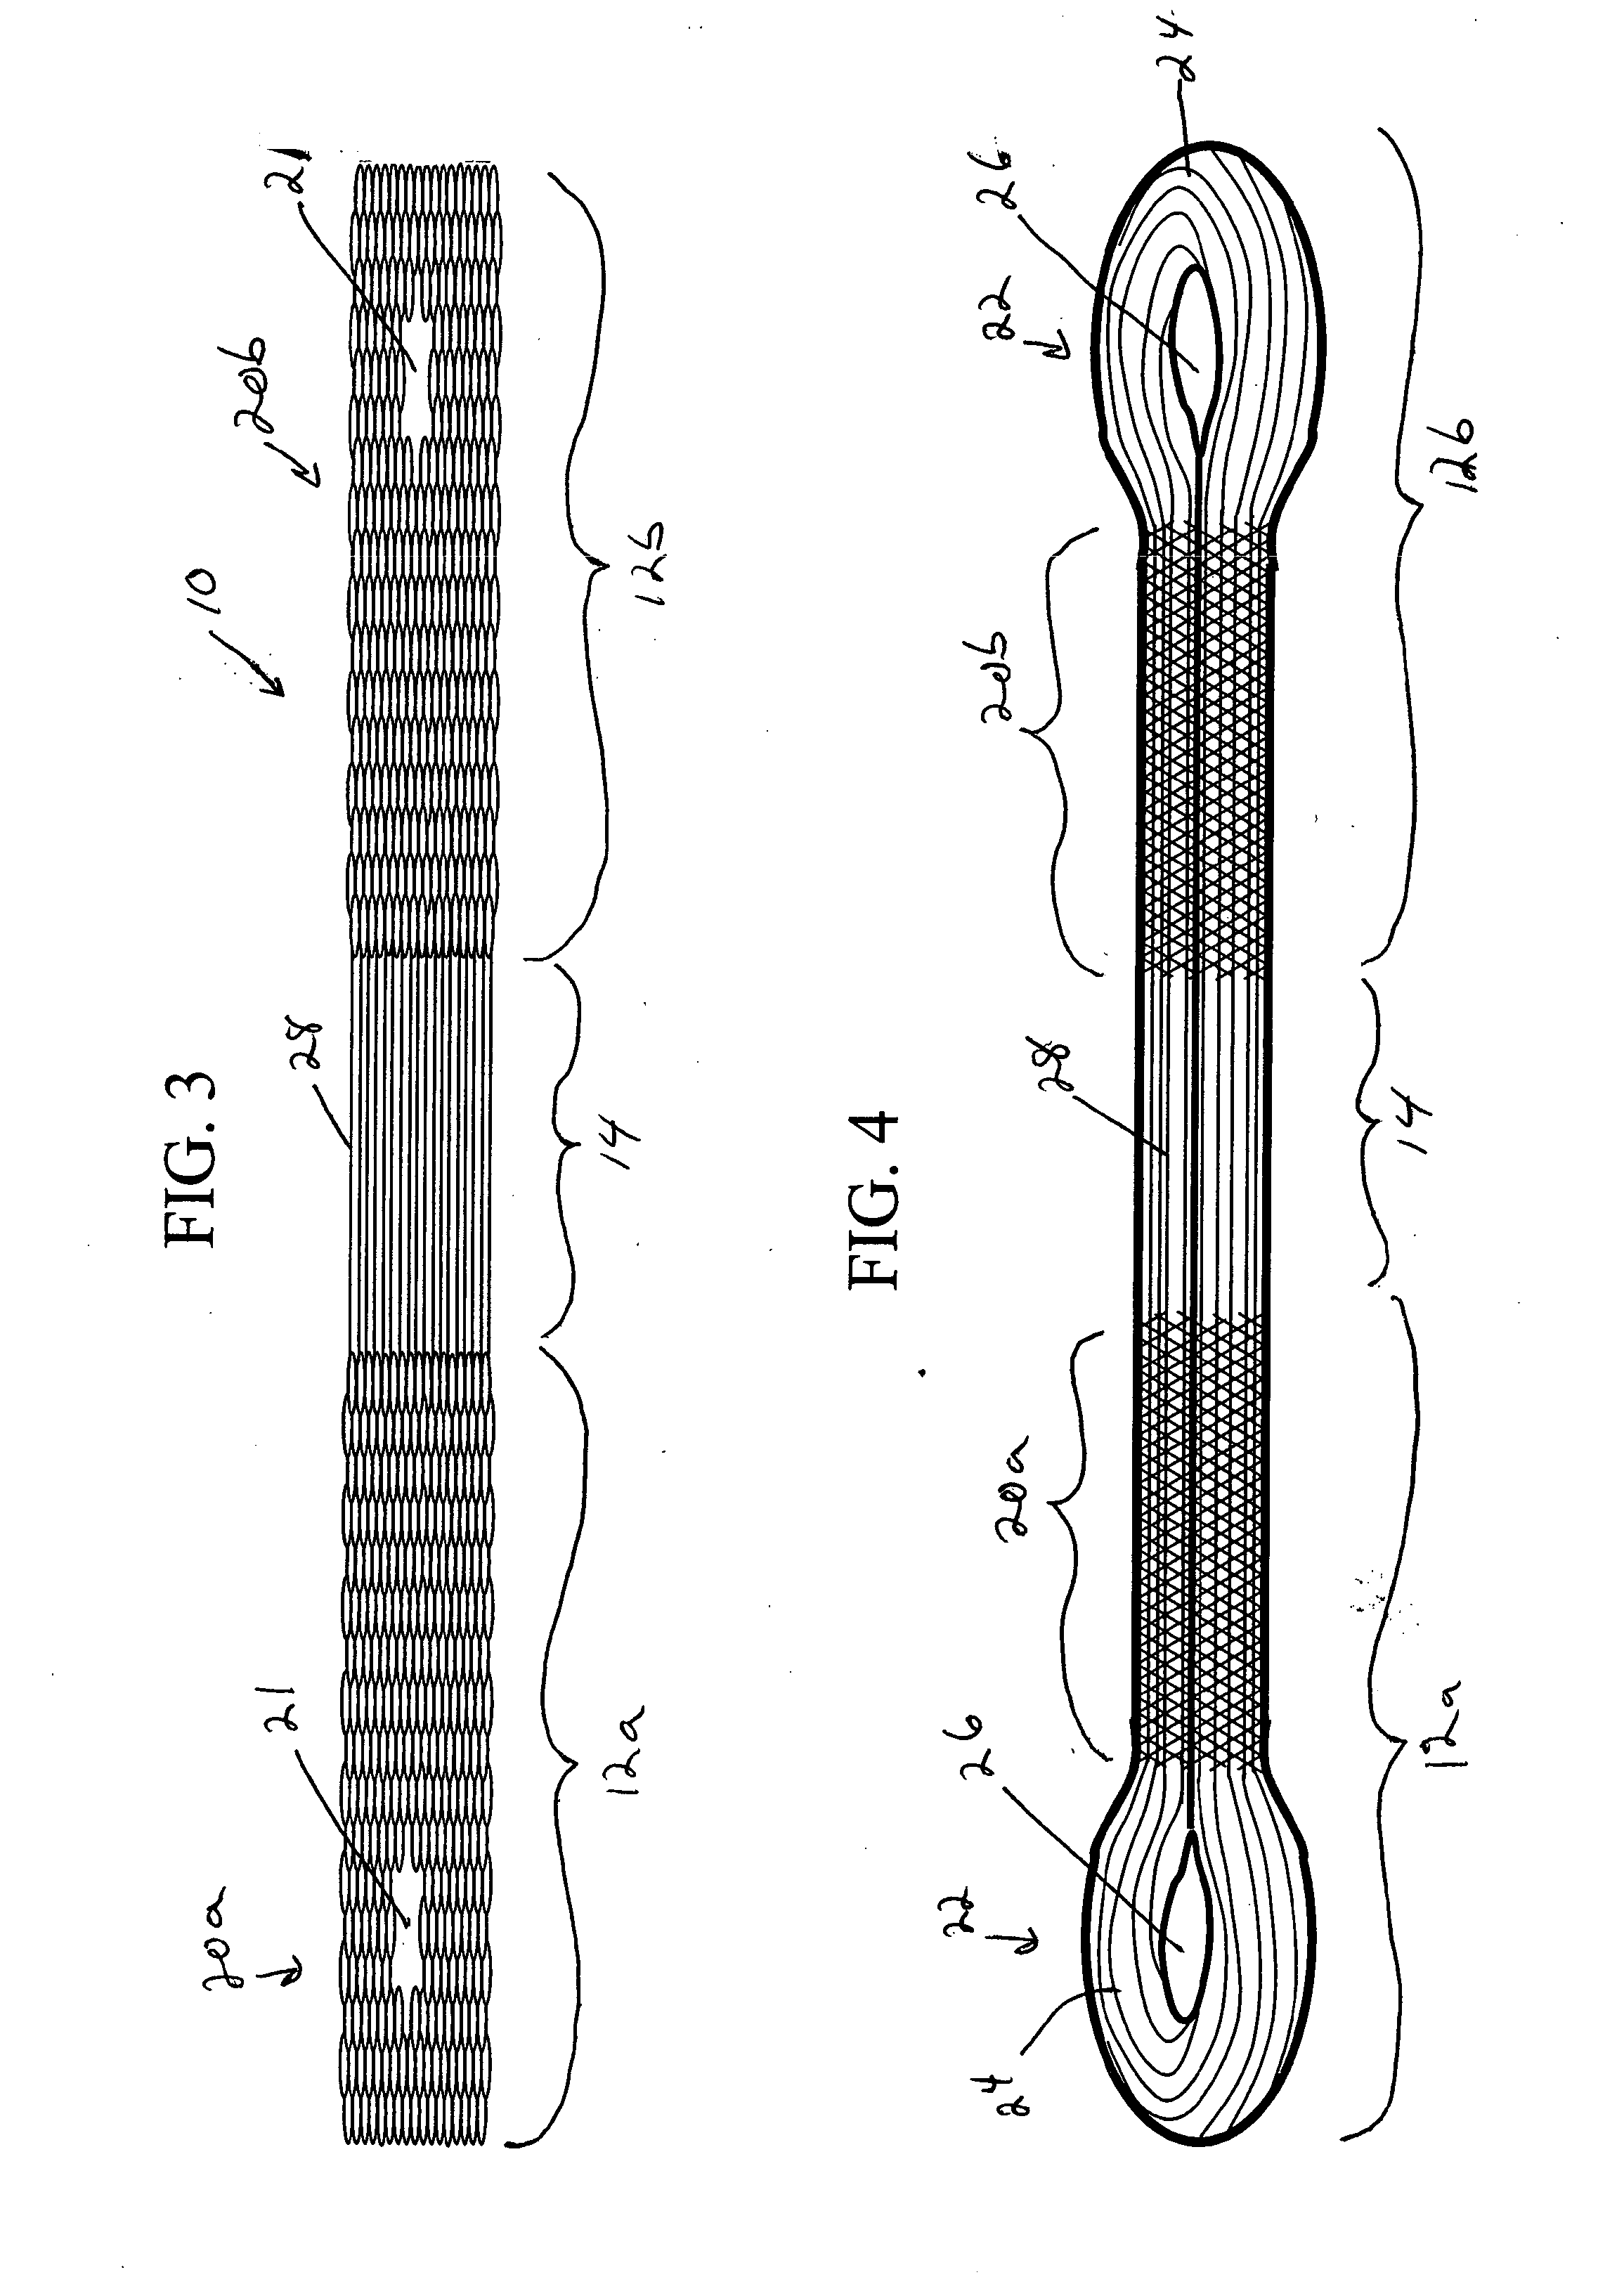 Scaffold for connective tissue repair